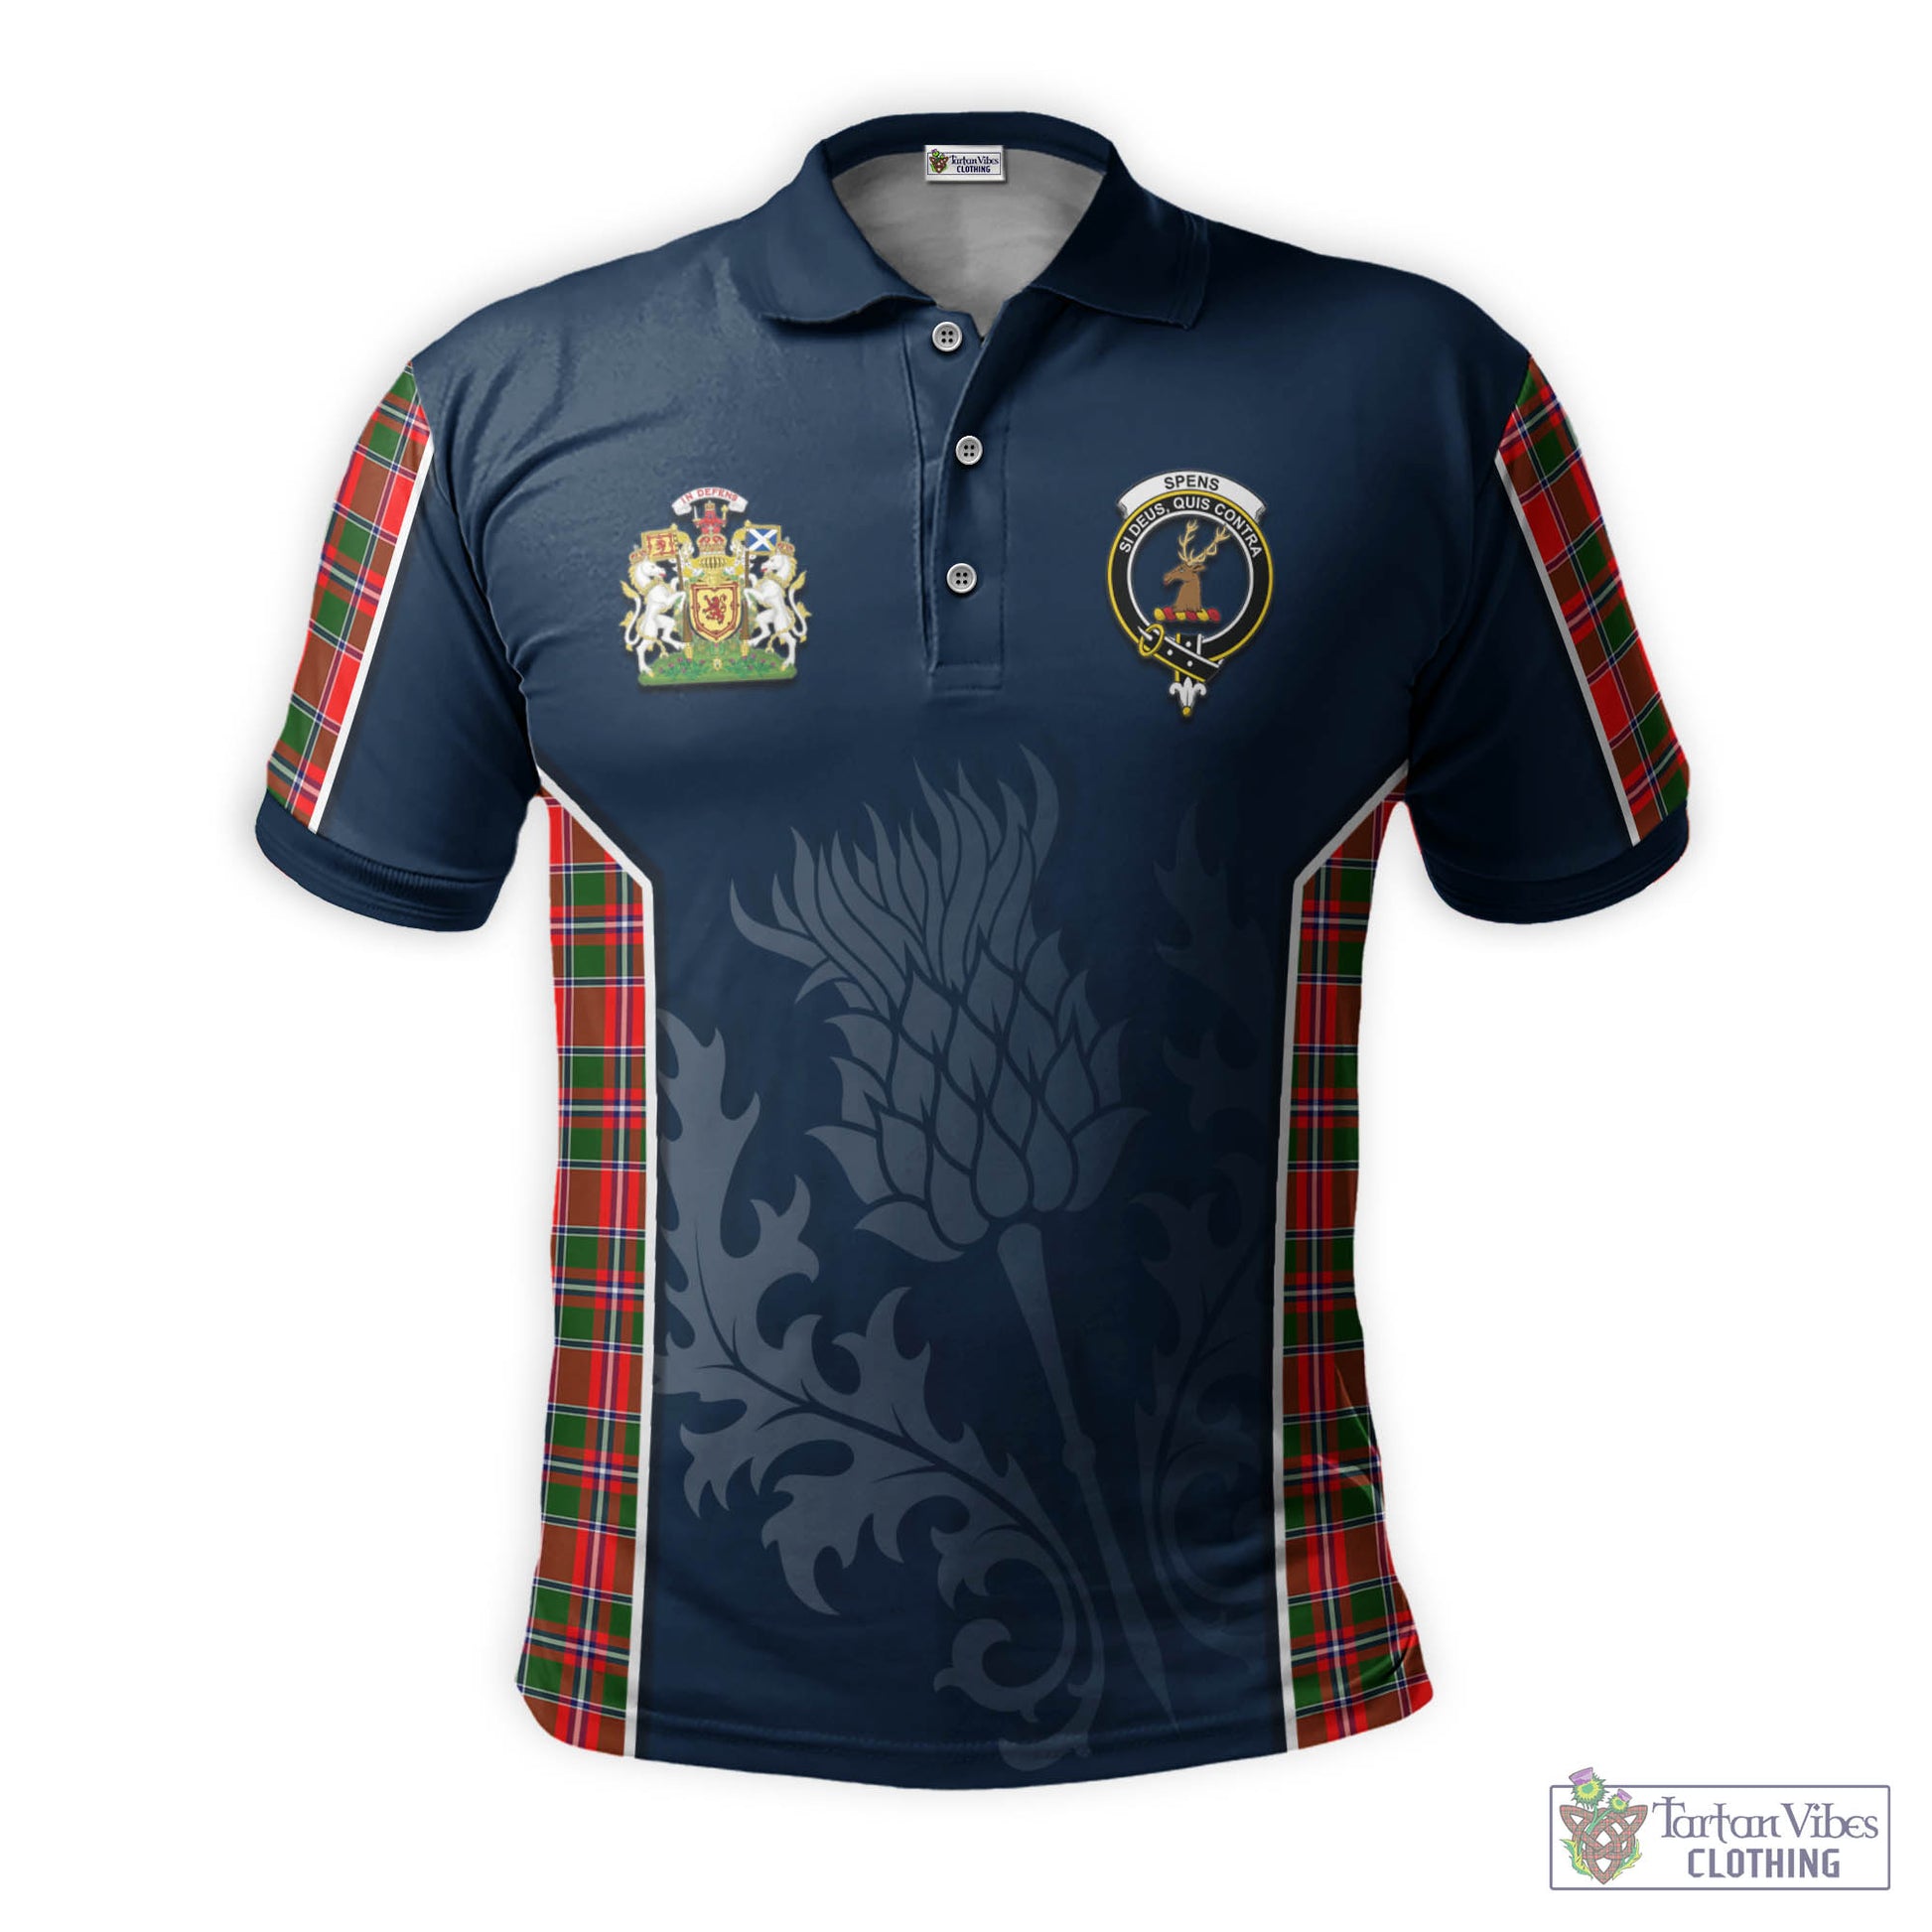 Tartan Vibes Clothing Spens Modern Tartan Men's Polo Shirt with Family Crest and Scottish Thistle Vibes Sport Style